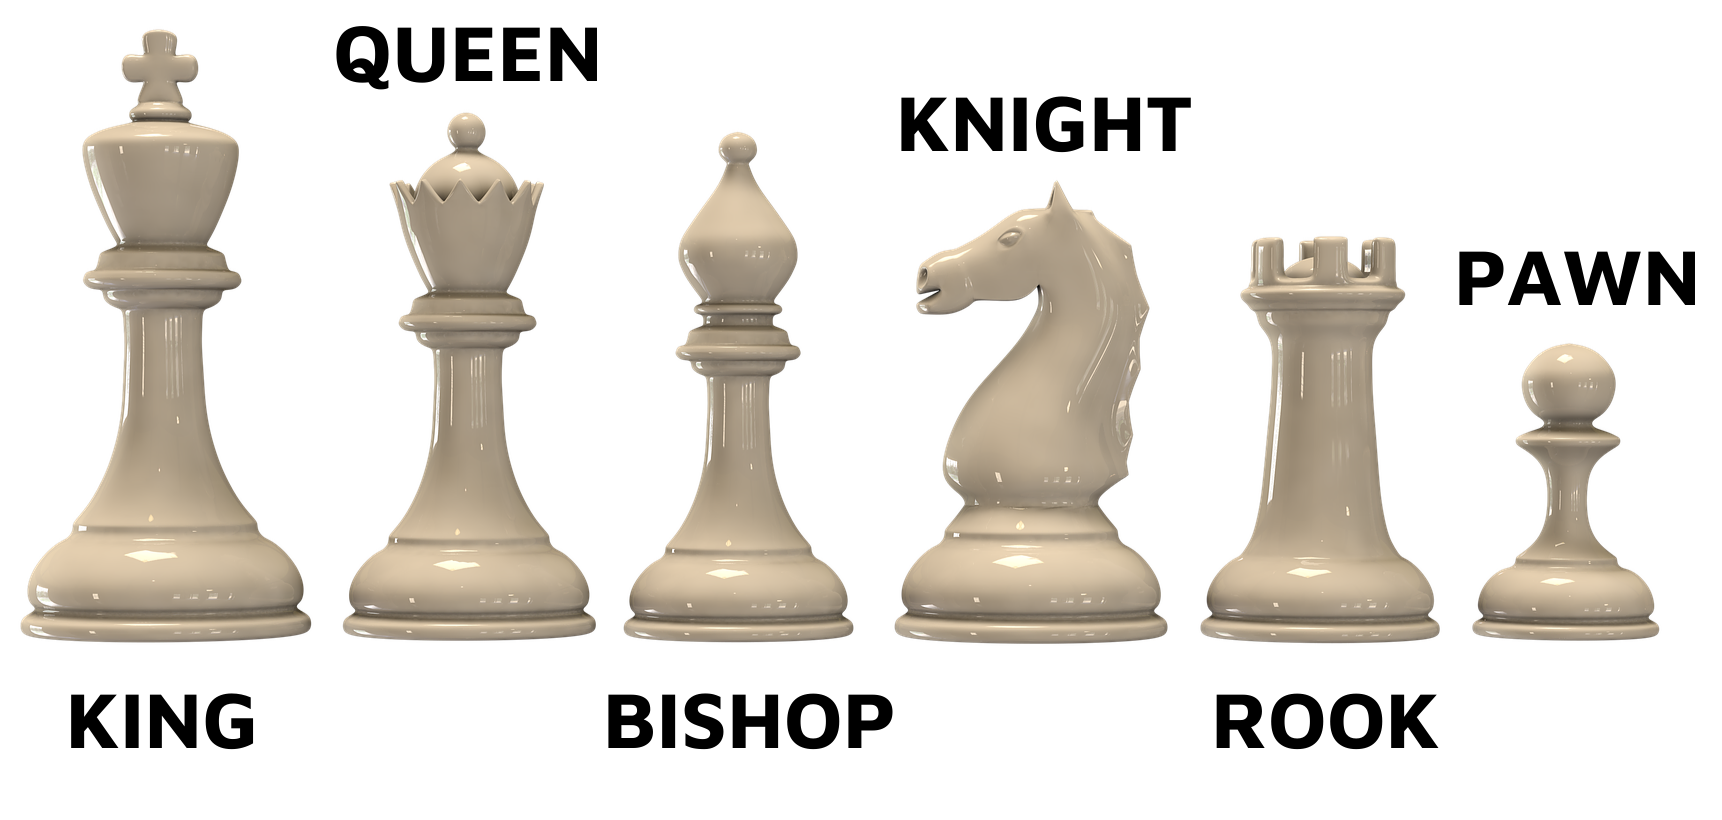 Proper Chess Board Setup - Identifying the Chess Pieces